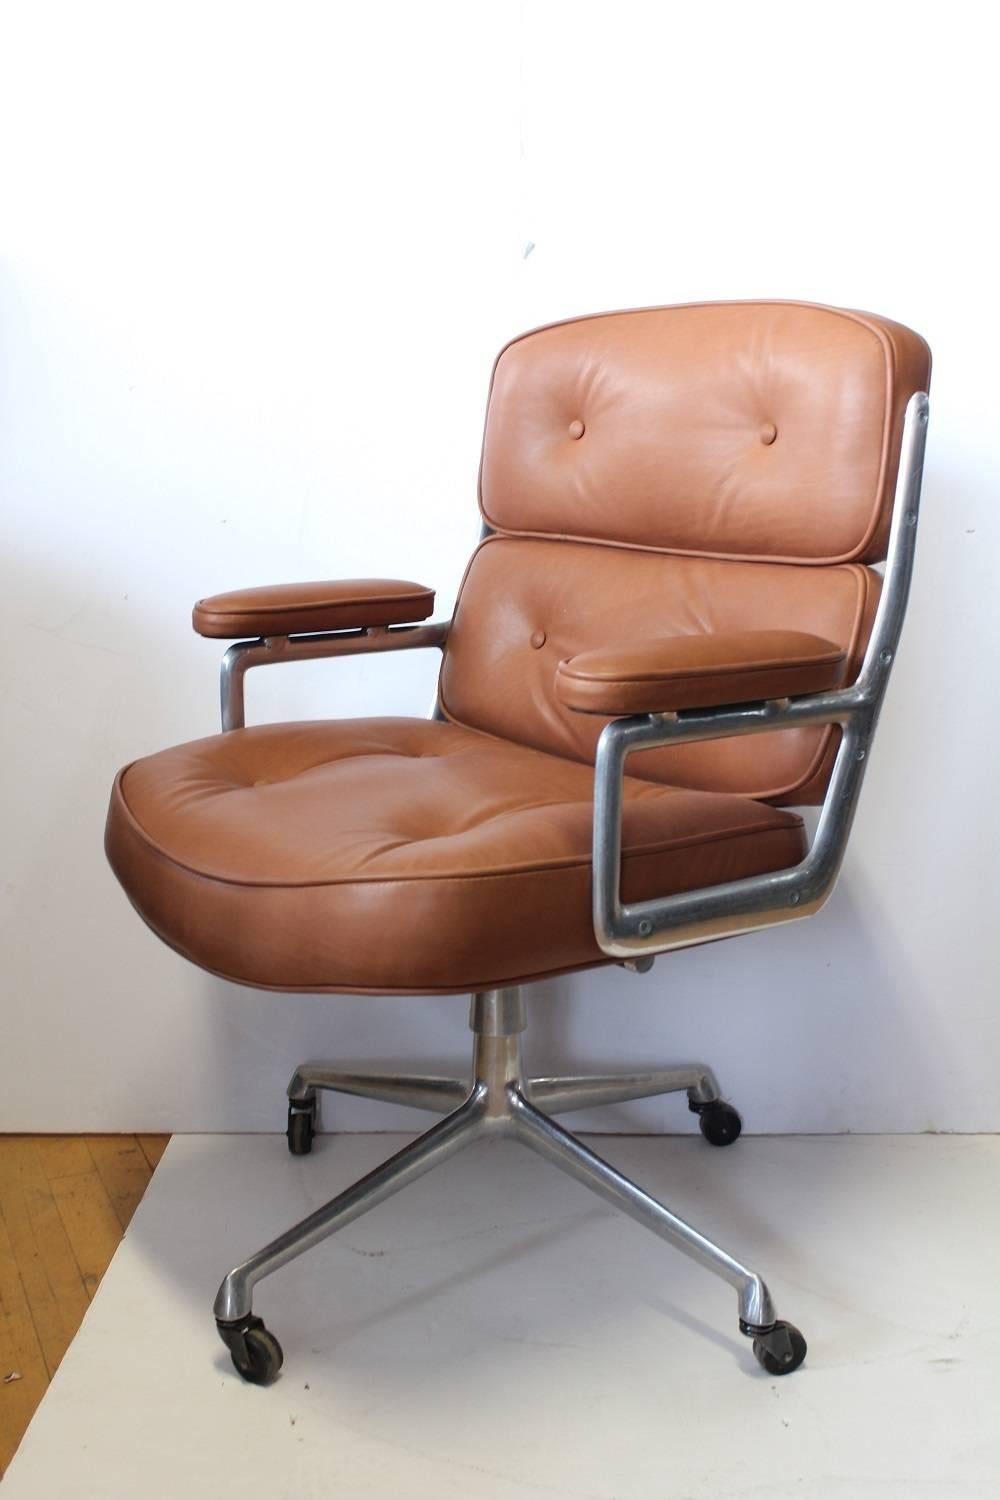 Time Life executive chair by Eames for Herman Miller. New leather upholstery.